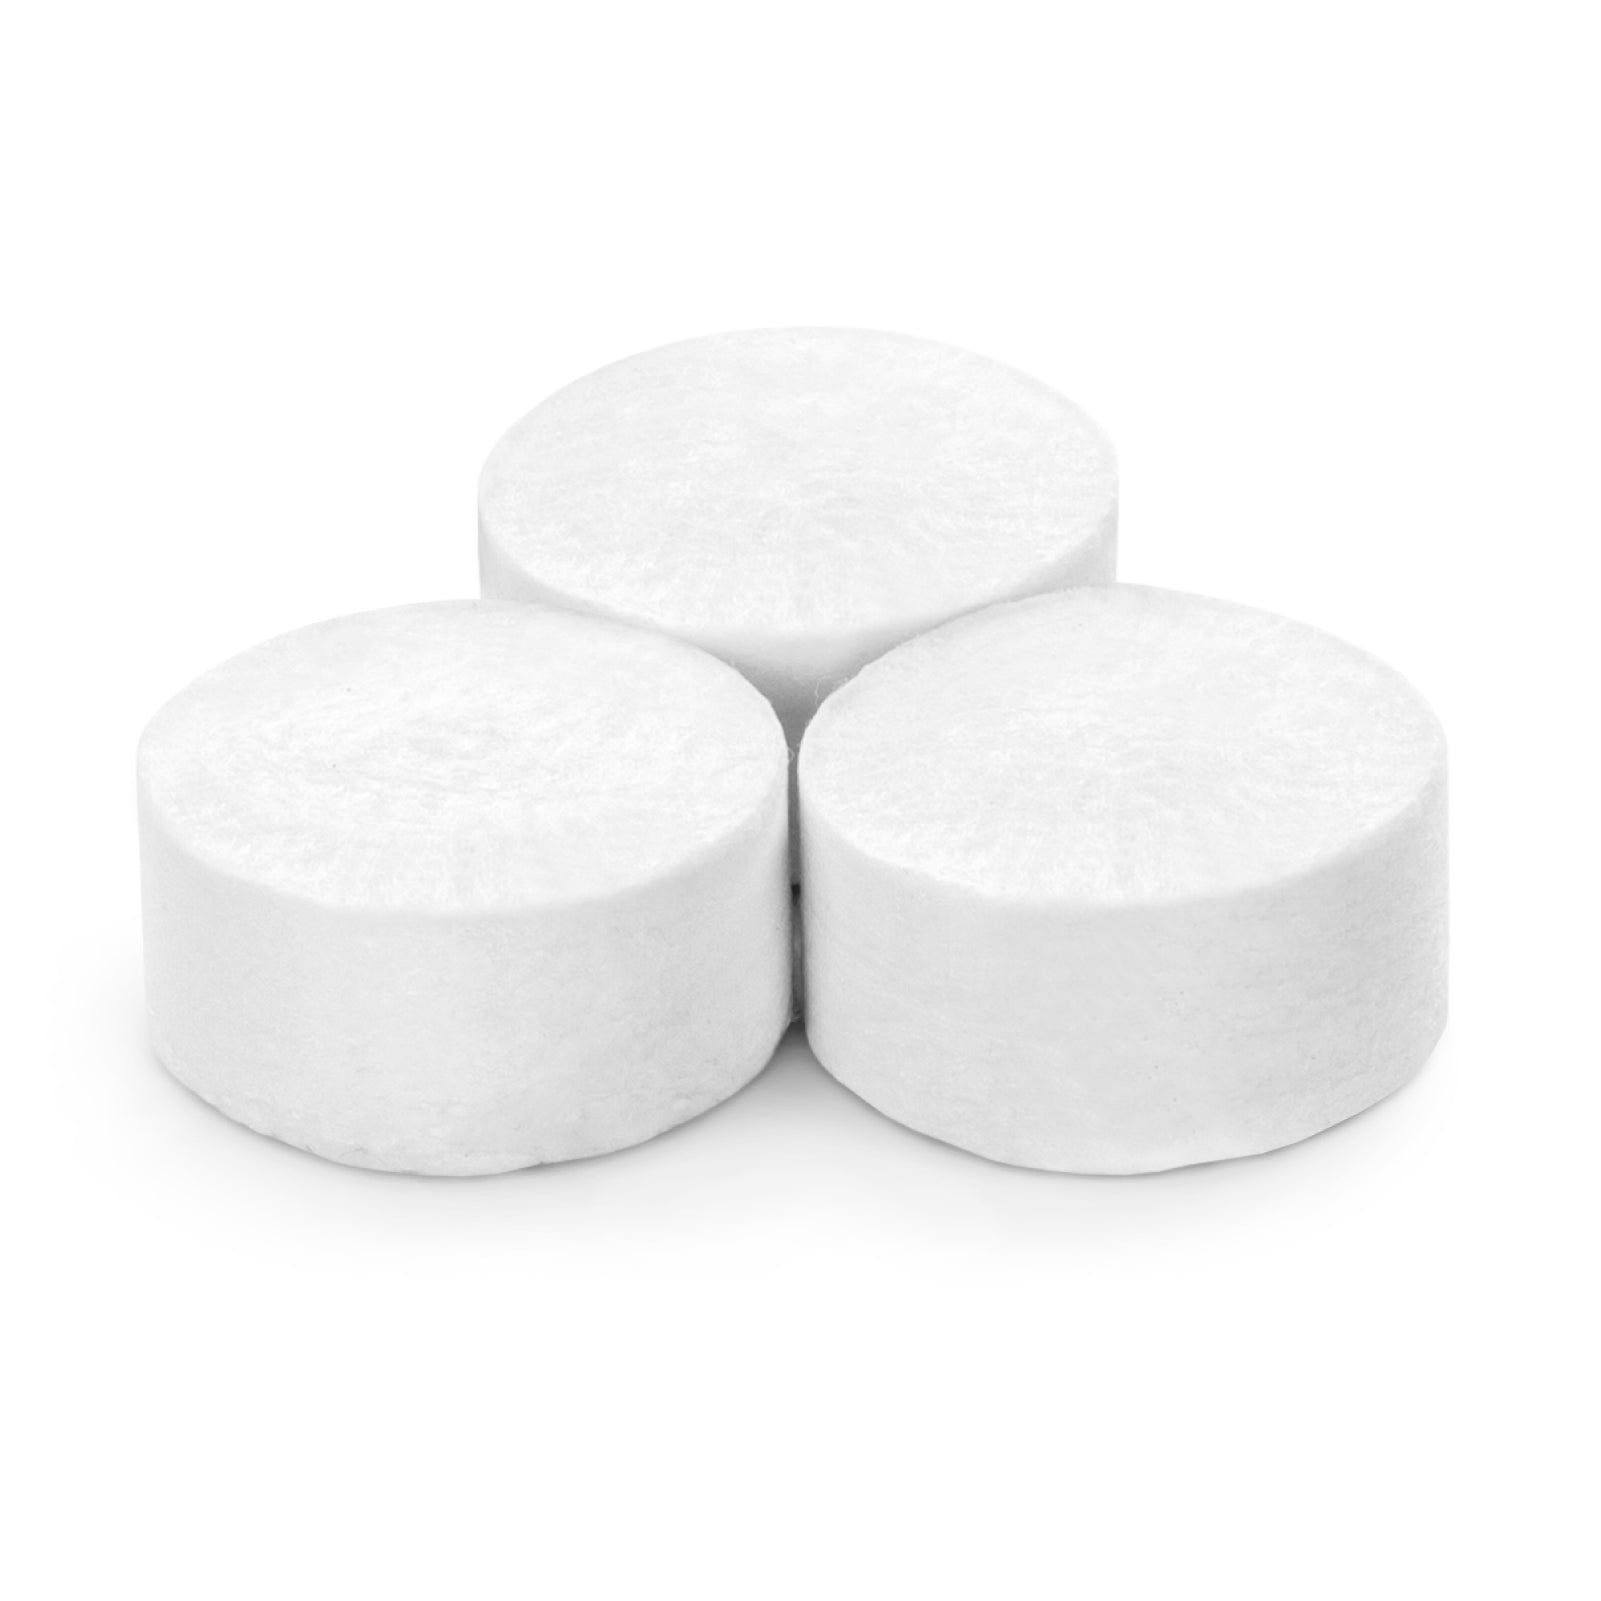 Leak Stopper Pads 5/8 inch – Express Water